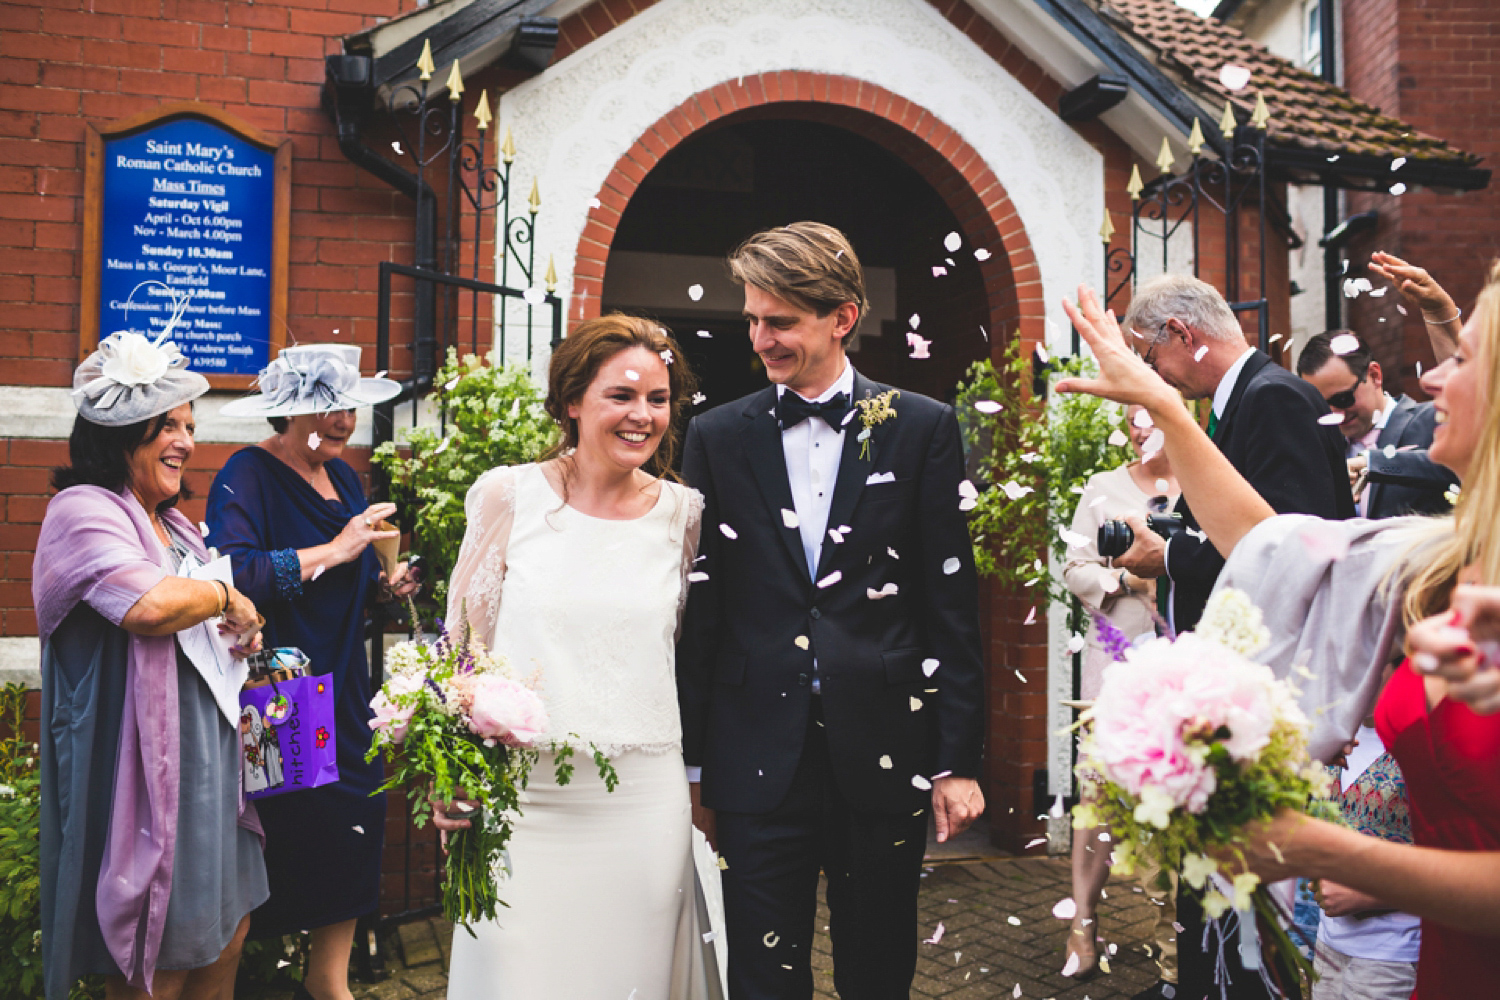 Bride Kate wore a Laure de Sagazan skirt and Elise Hameau top, both from The Mews Bridal of Notting Hill for her wedding in Filey North Yorkshire. Images by Photography34.